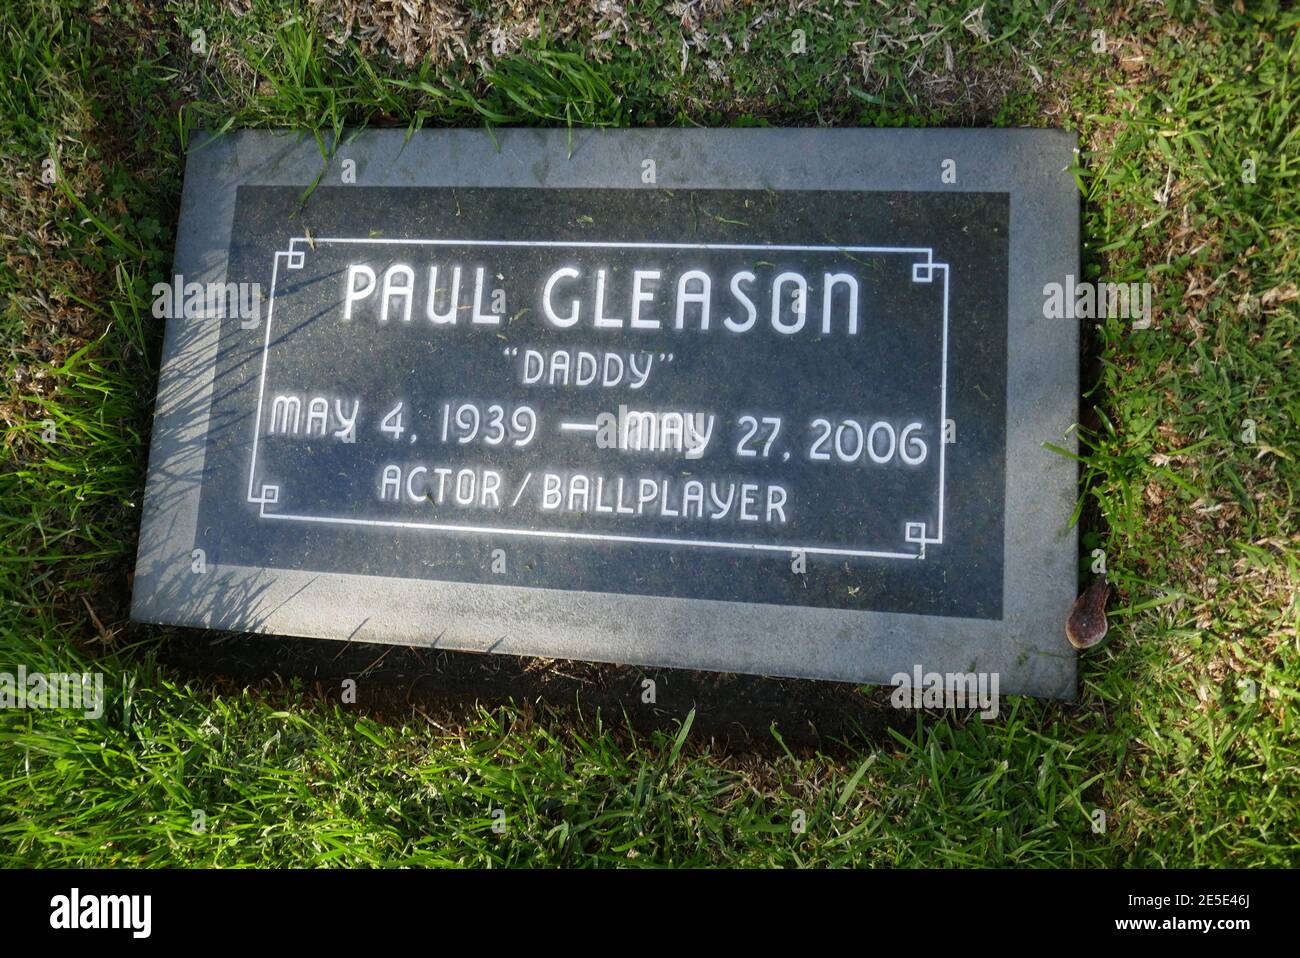 Los Angeles, California, USA 26th January 2021 A general view of atmosphere of actor Paul Gleason's grave at Pierce Brothers Westwood Village Memorial Park on January 26, 2021 in Los Angeles, California, USA. Photo by Barry King/Alamy Stock Photo Stock Photo